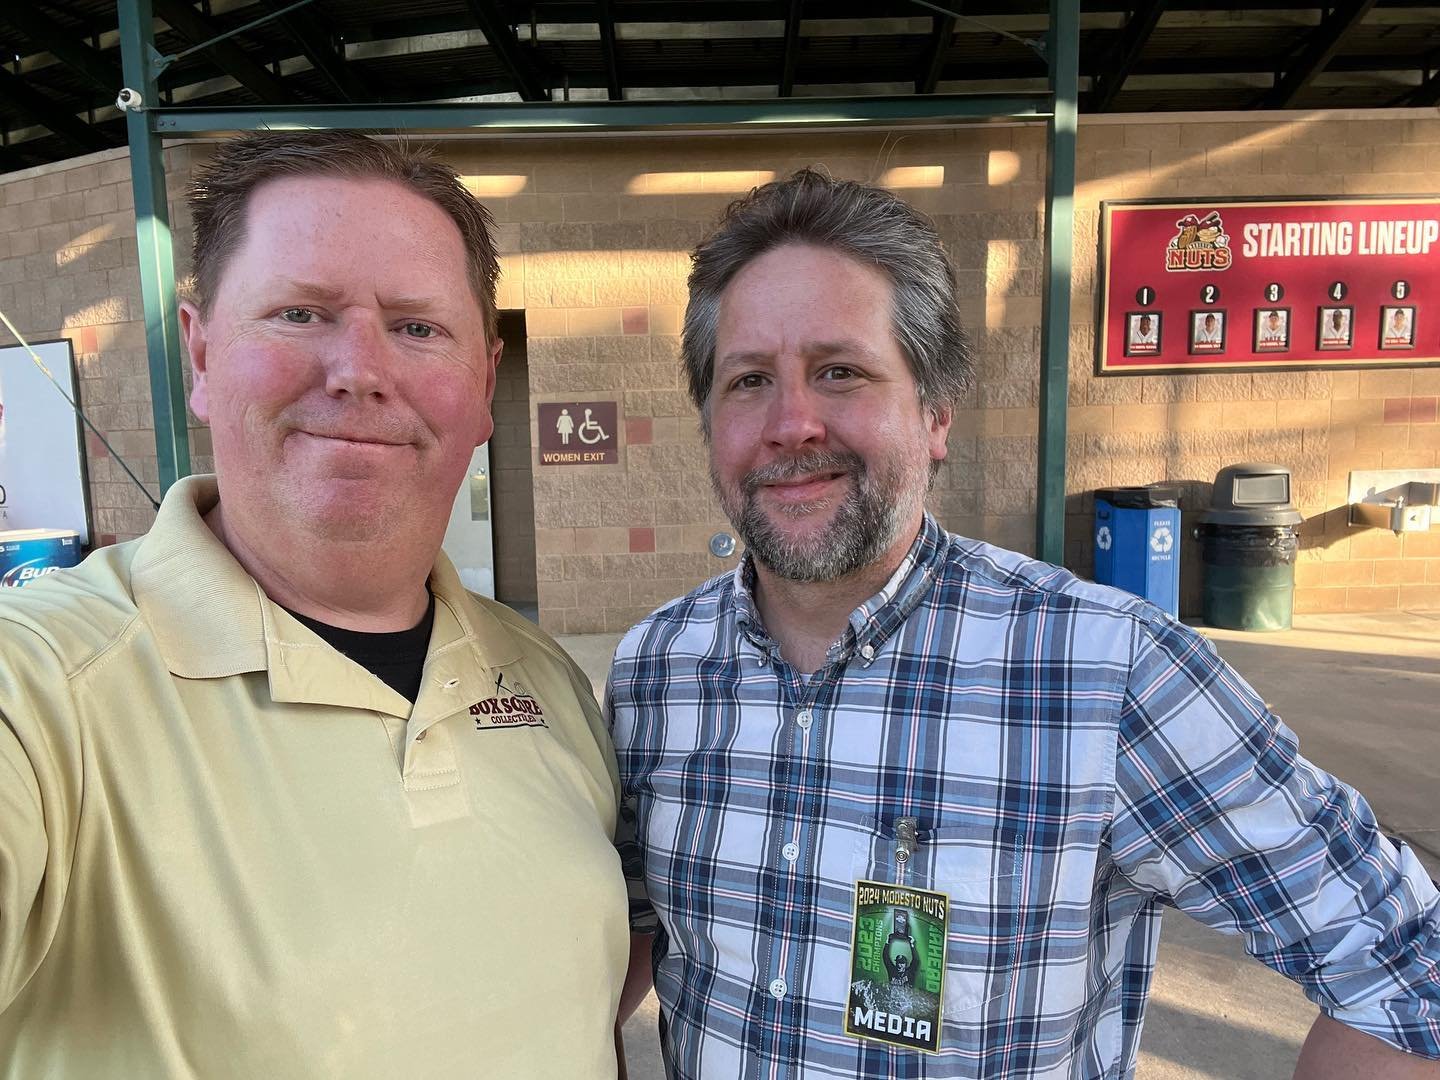 Thank you to @thebensbiz for stopping by the table last night at the @modestonuts game. It was a pleasure to talk to you. I&rsquo;m hoping we can get you on our upcoming podcast some time!